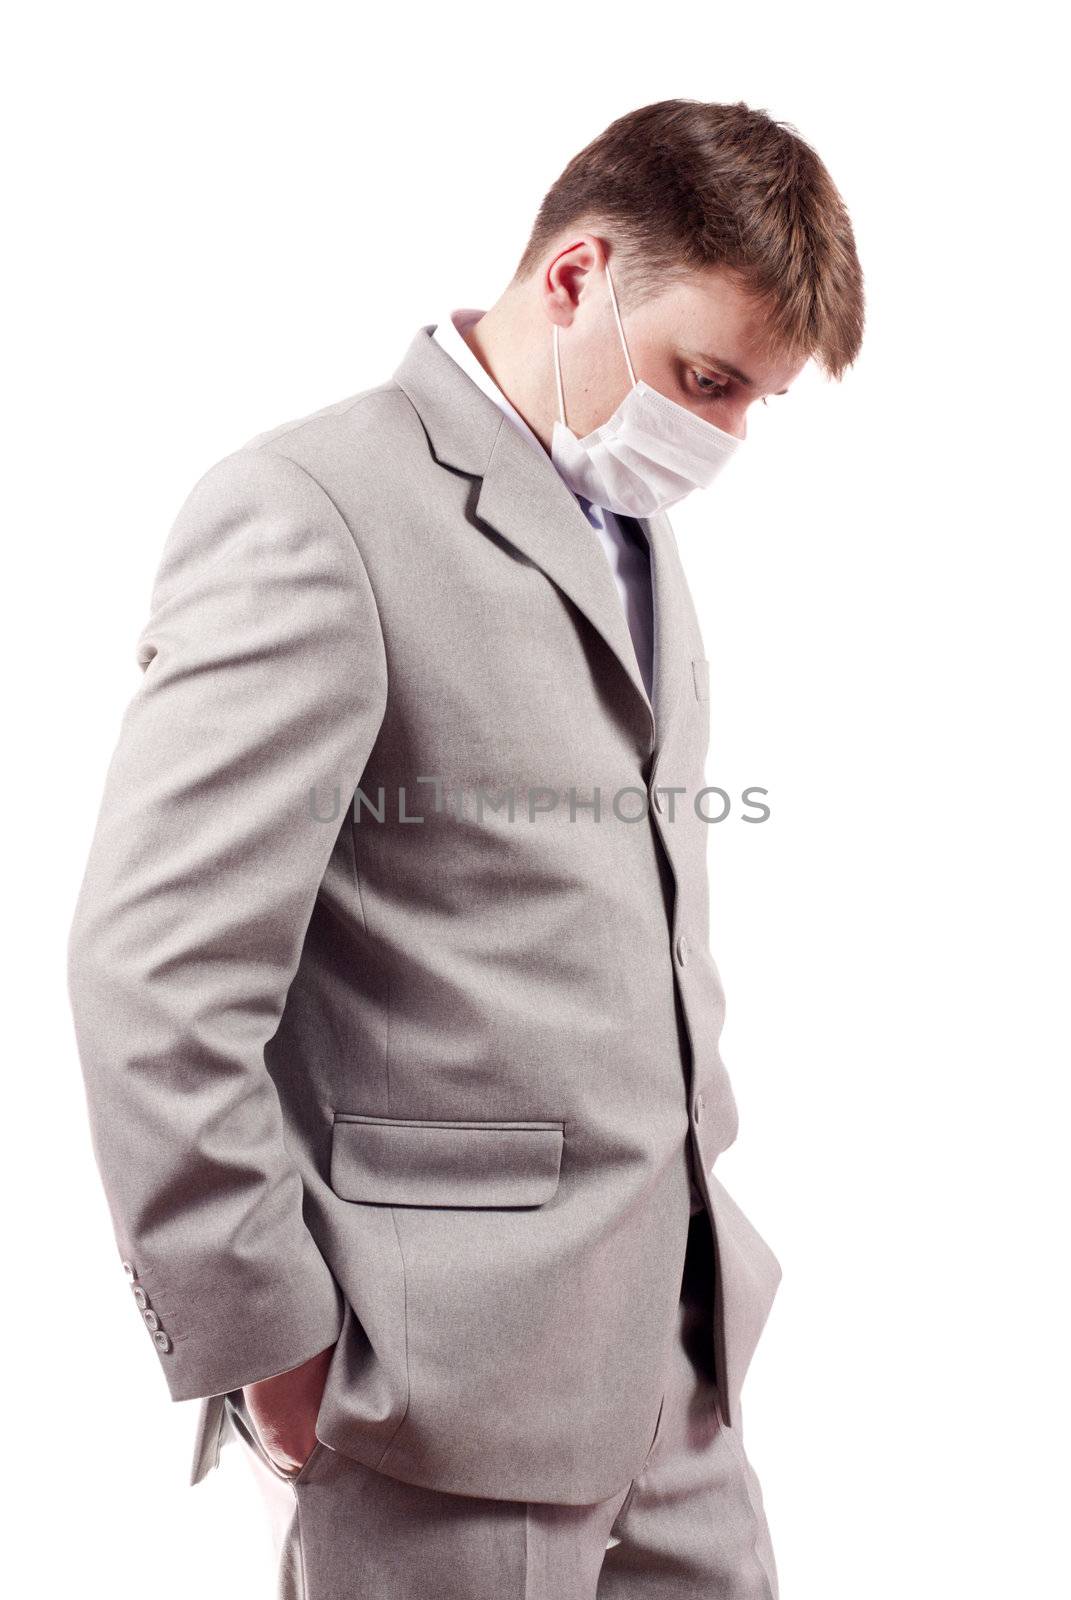 man in a mask on a white background